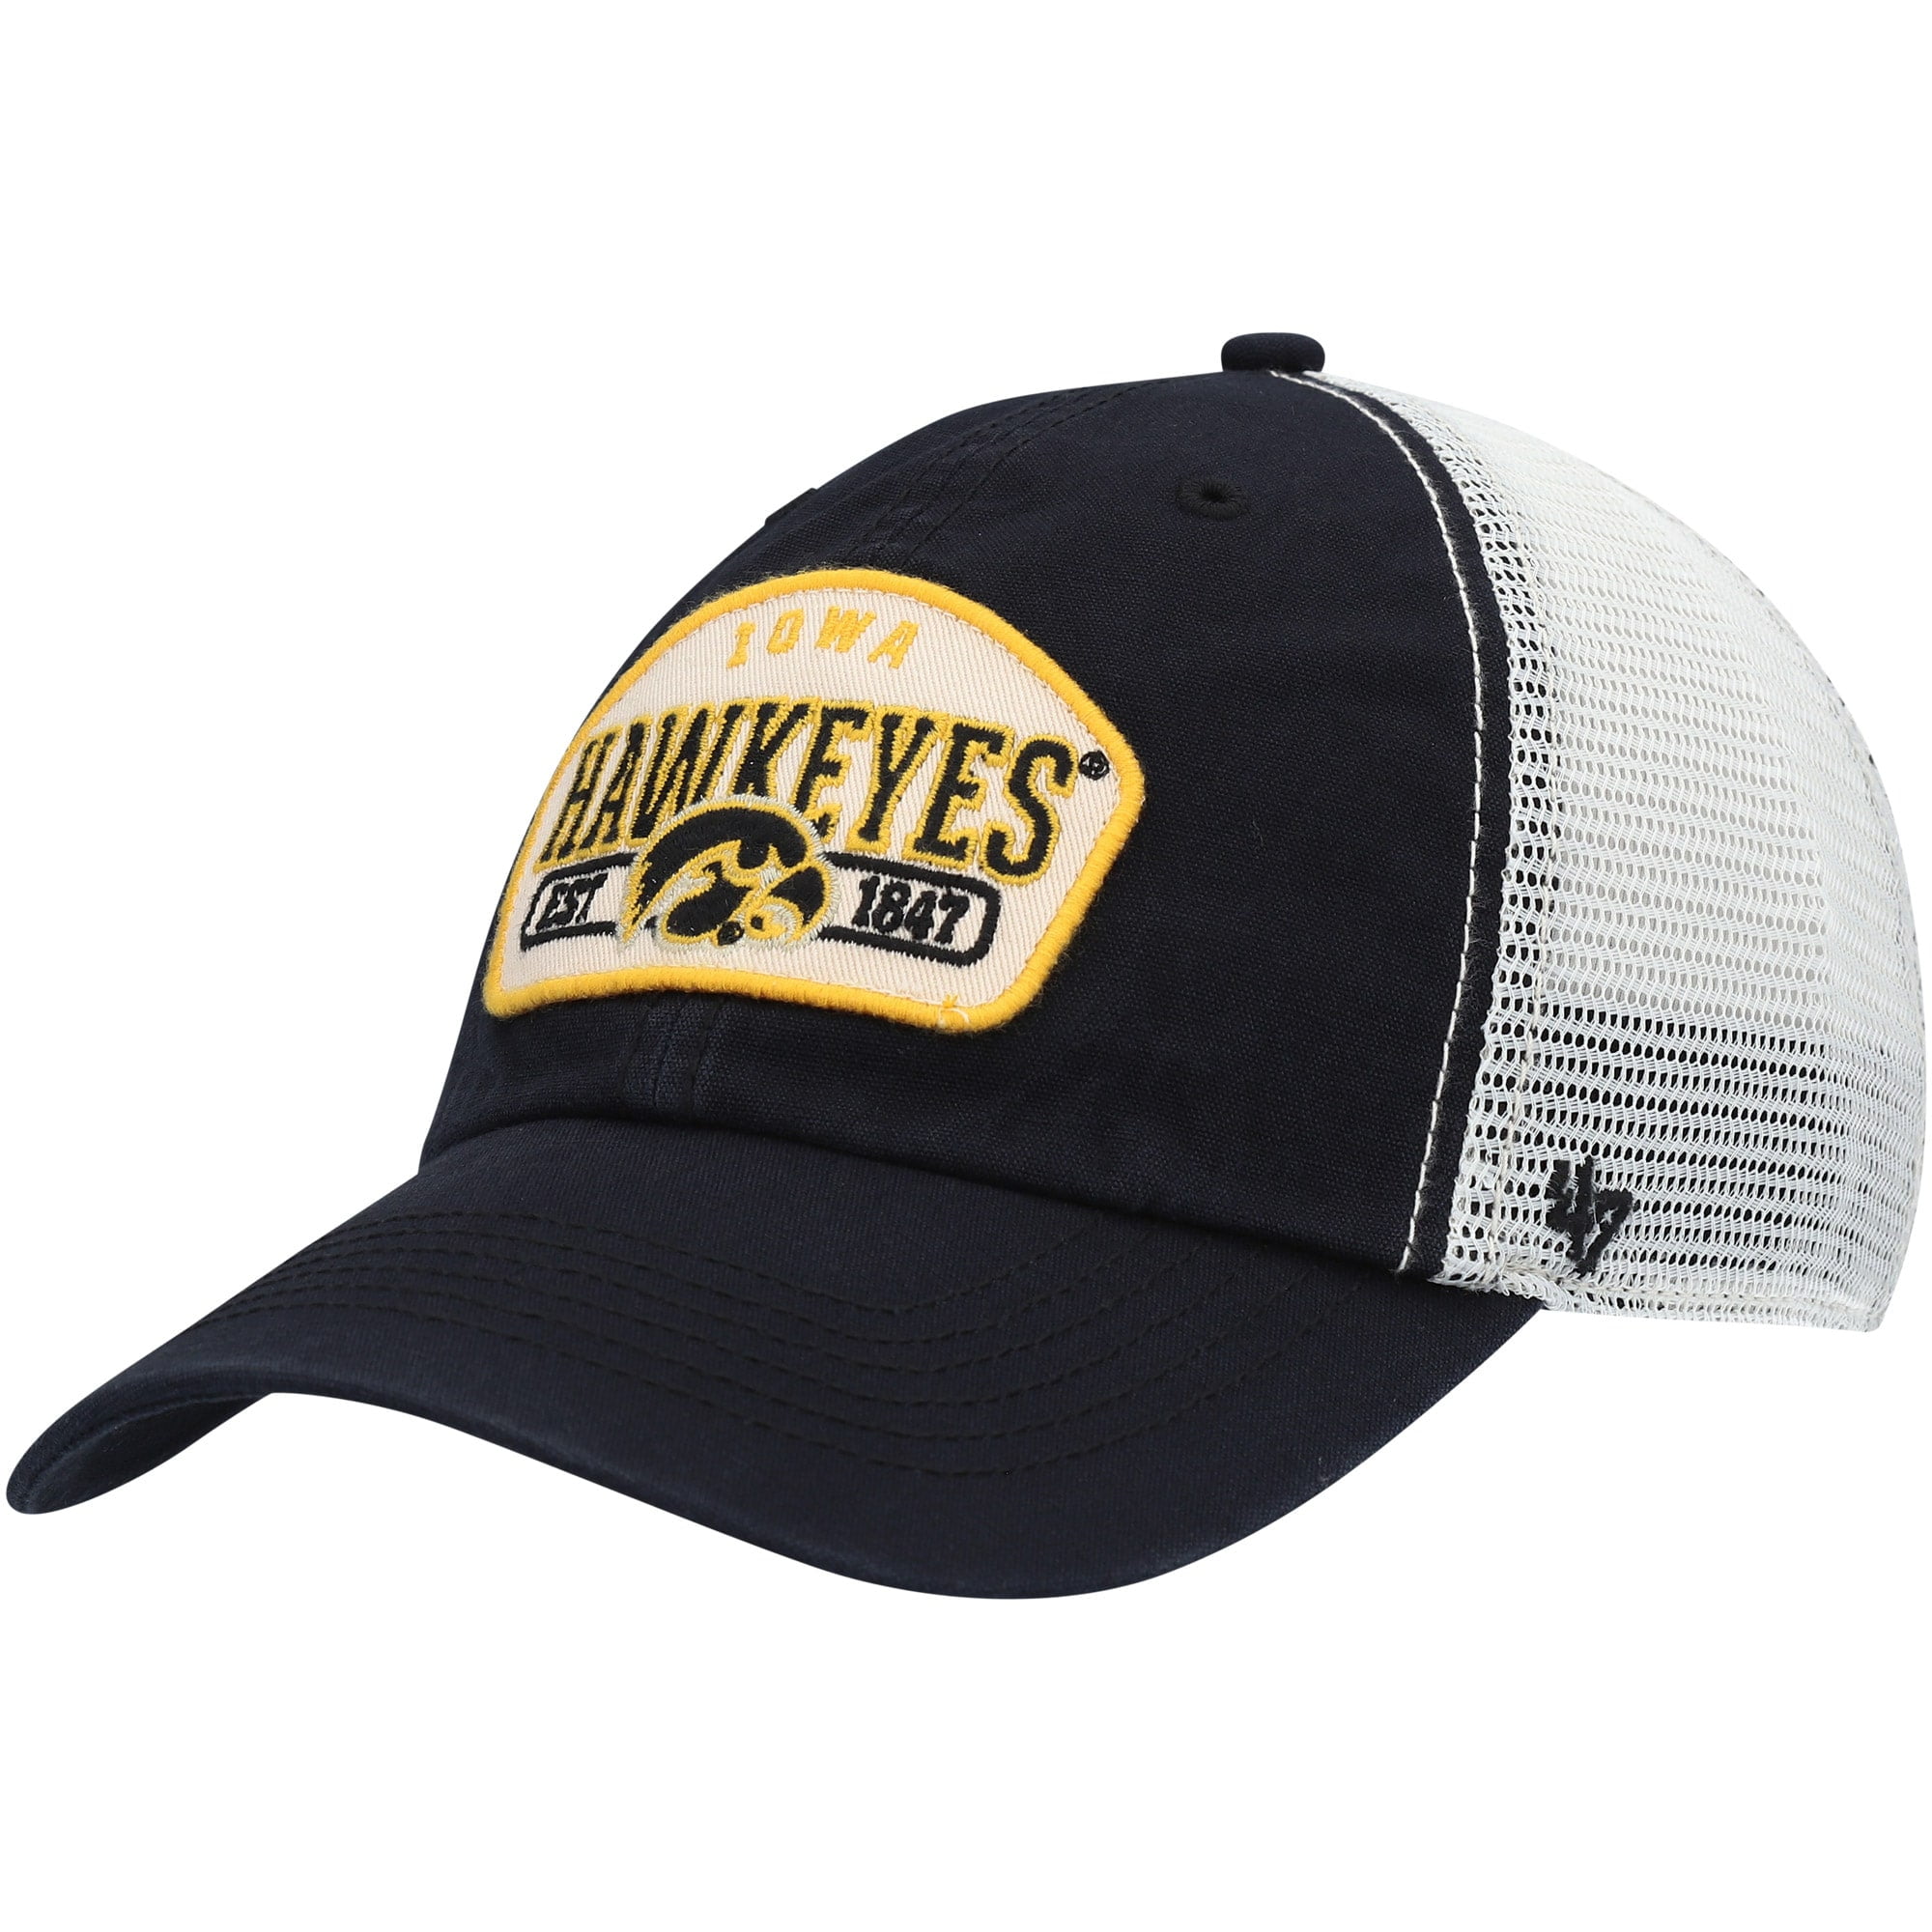 Mission Hockey Trucker Style Ball Cap Hat  MSRP $24.99 New 